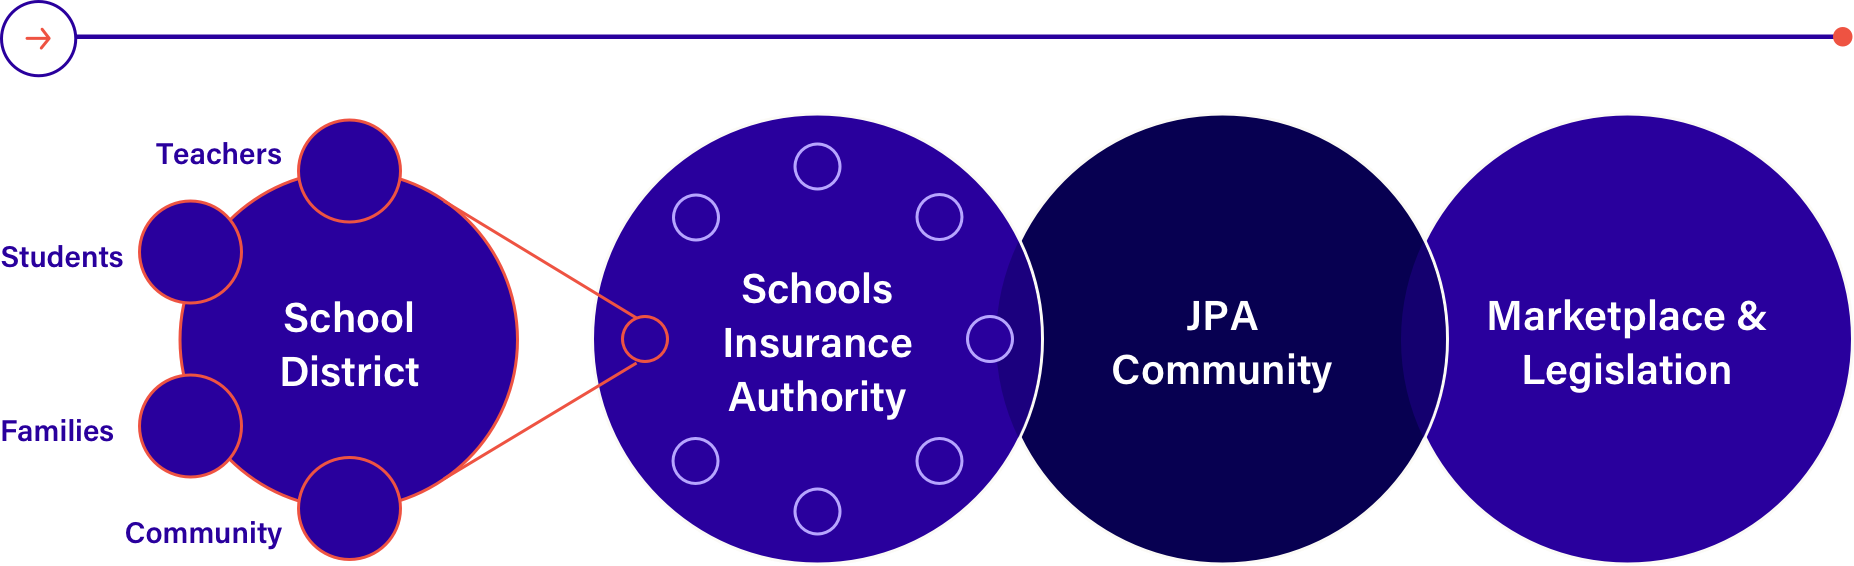 Venn diagram demonstrating how teachers, students, families and the community make up an individual school district that is one of many members of Schools Insurance Authority.  SIA acts as the bridge and connector for their member school districts and organizations to the broader joint powers authority (JPA) community as well as the insurance marketplace and legislation.